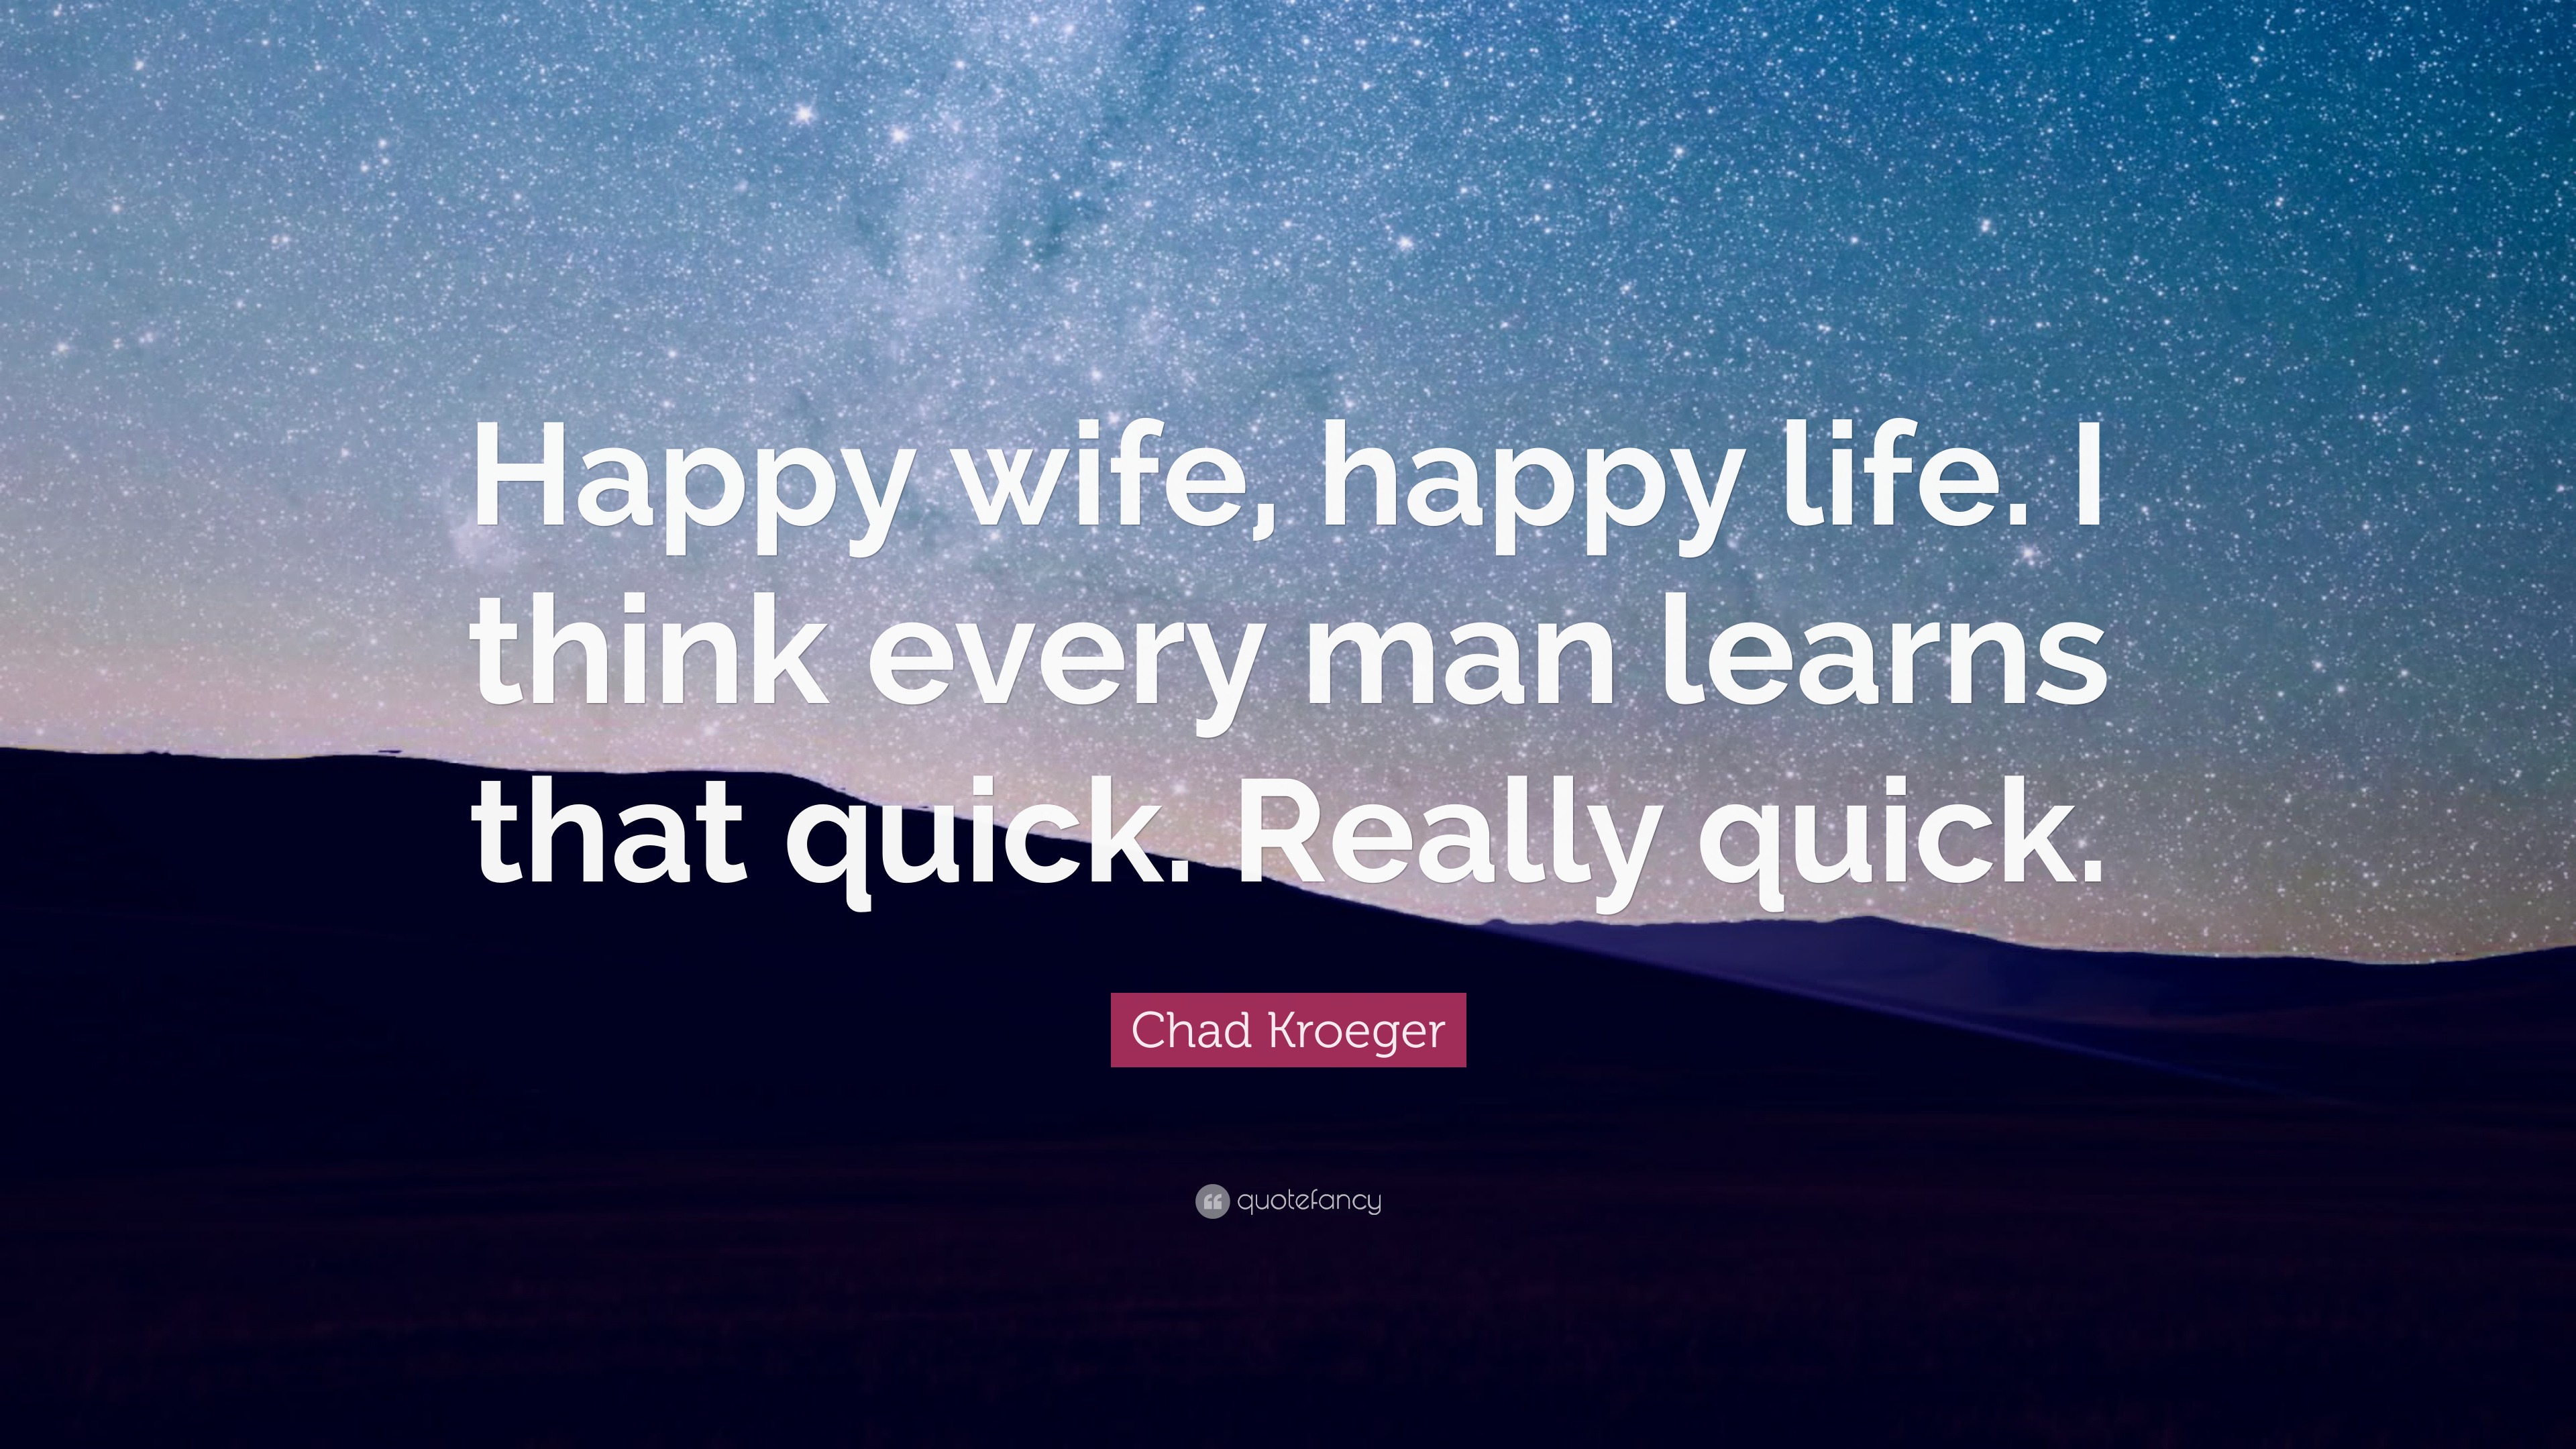 https://quotefancy.com/media/wallpaper/3840x2160/5323349-Chad-Kroeger-Quote-Happy-wife-happy-life-I-think-every-man-learns.jpg